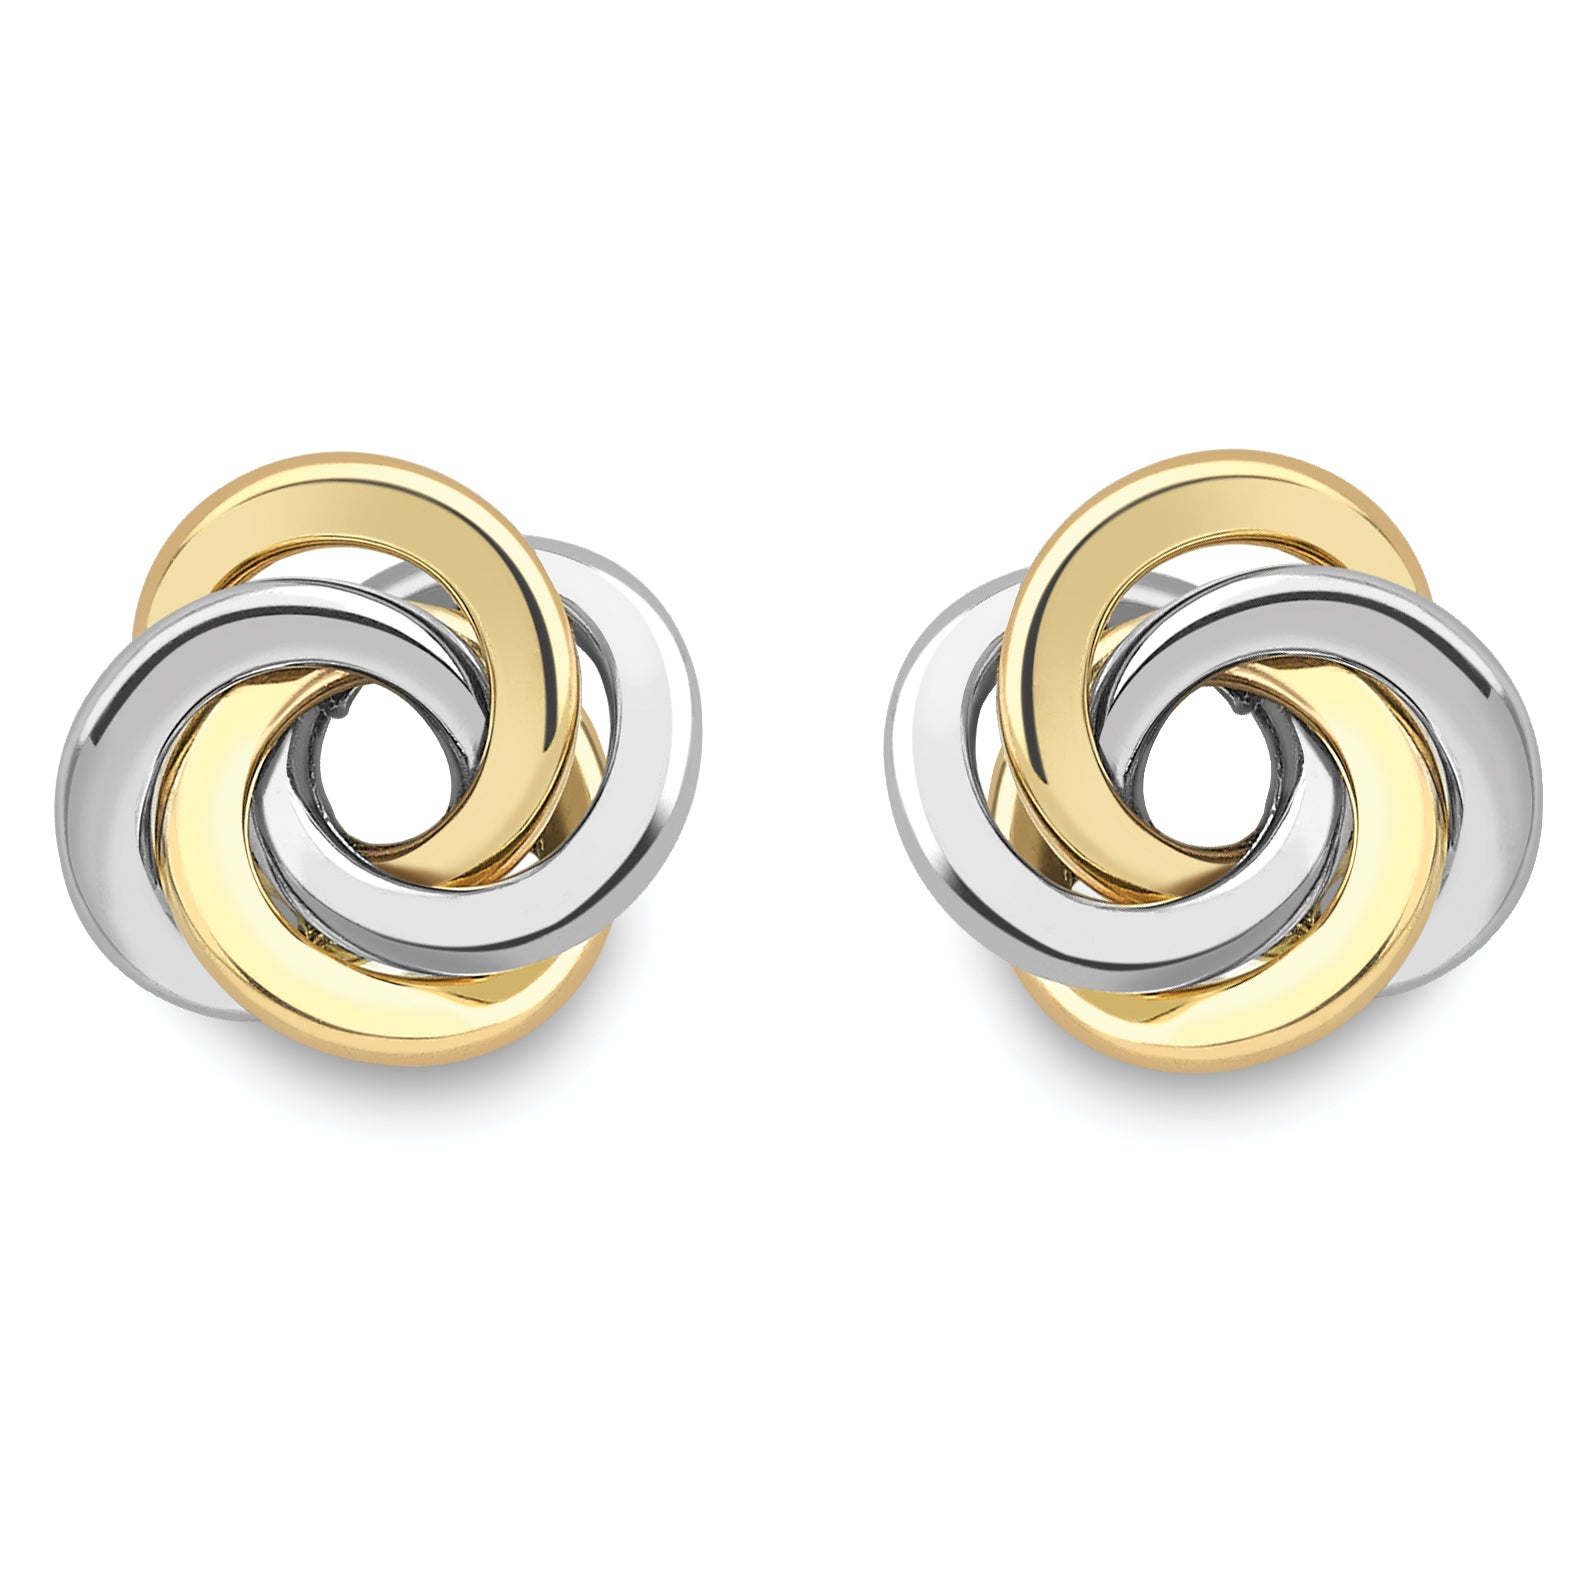 9ct White & Yellow Gold  Whirlpool Knot Stud Earrings - ERNR02123